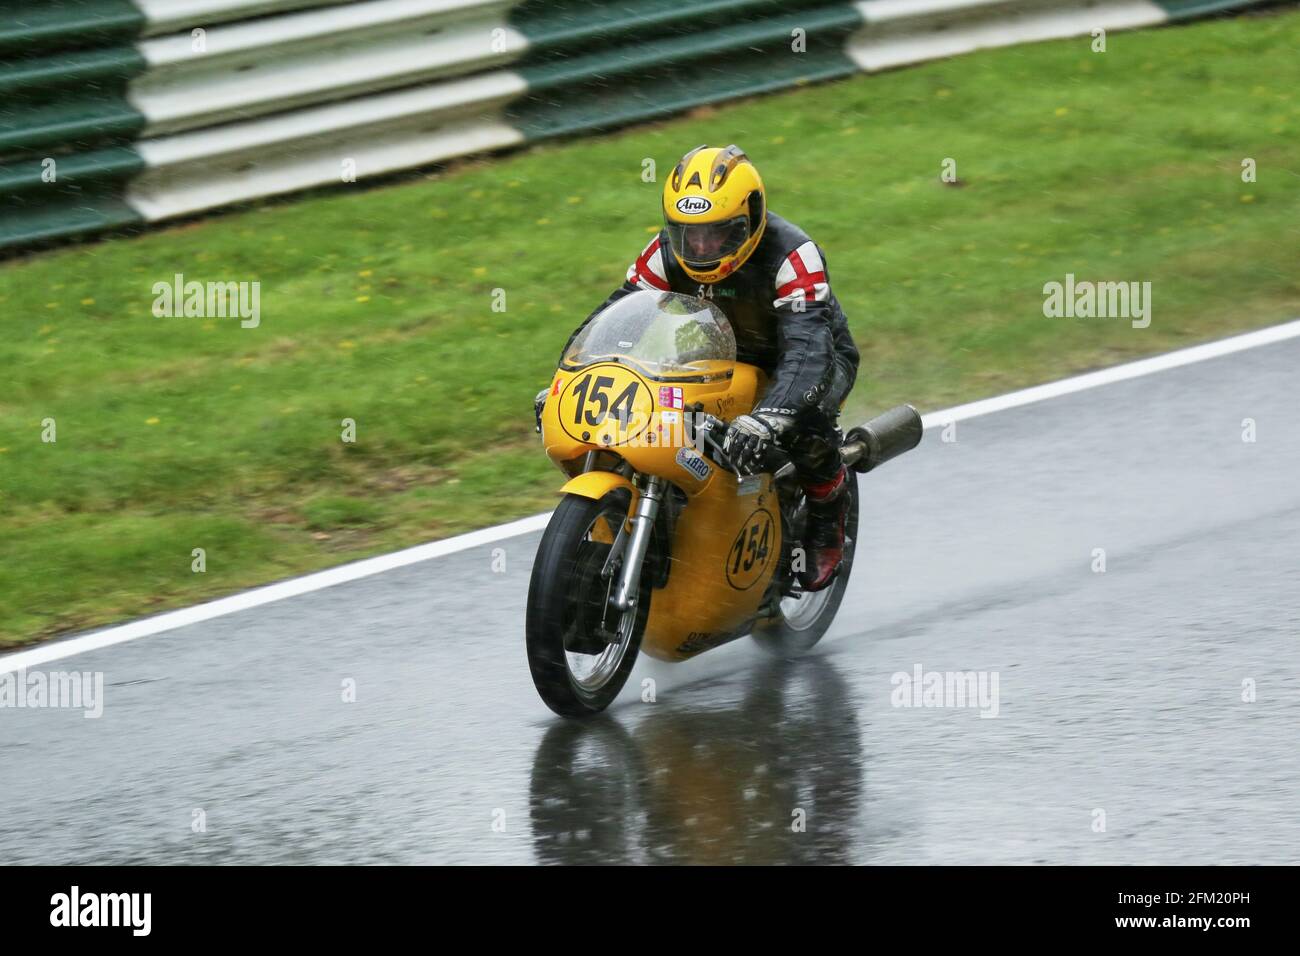 Ian Steltner racing in the rain aboard the 500cc Seeley G50 at the Cadwell Park International Classic in July 2015 Stock Photo